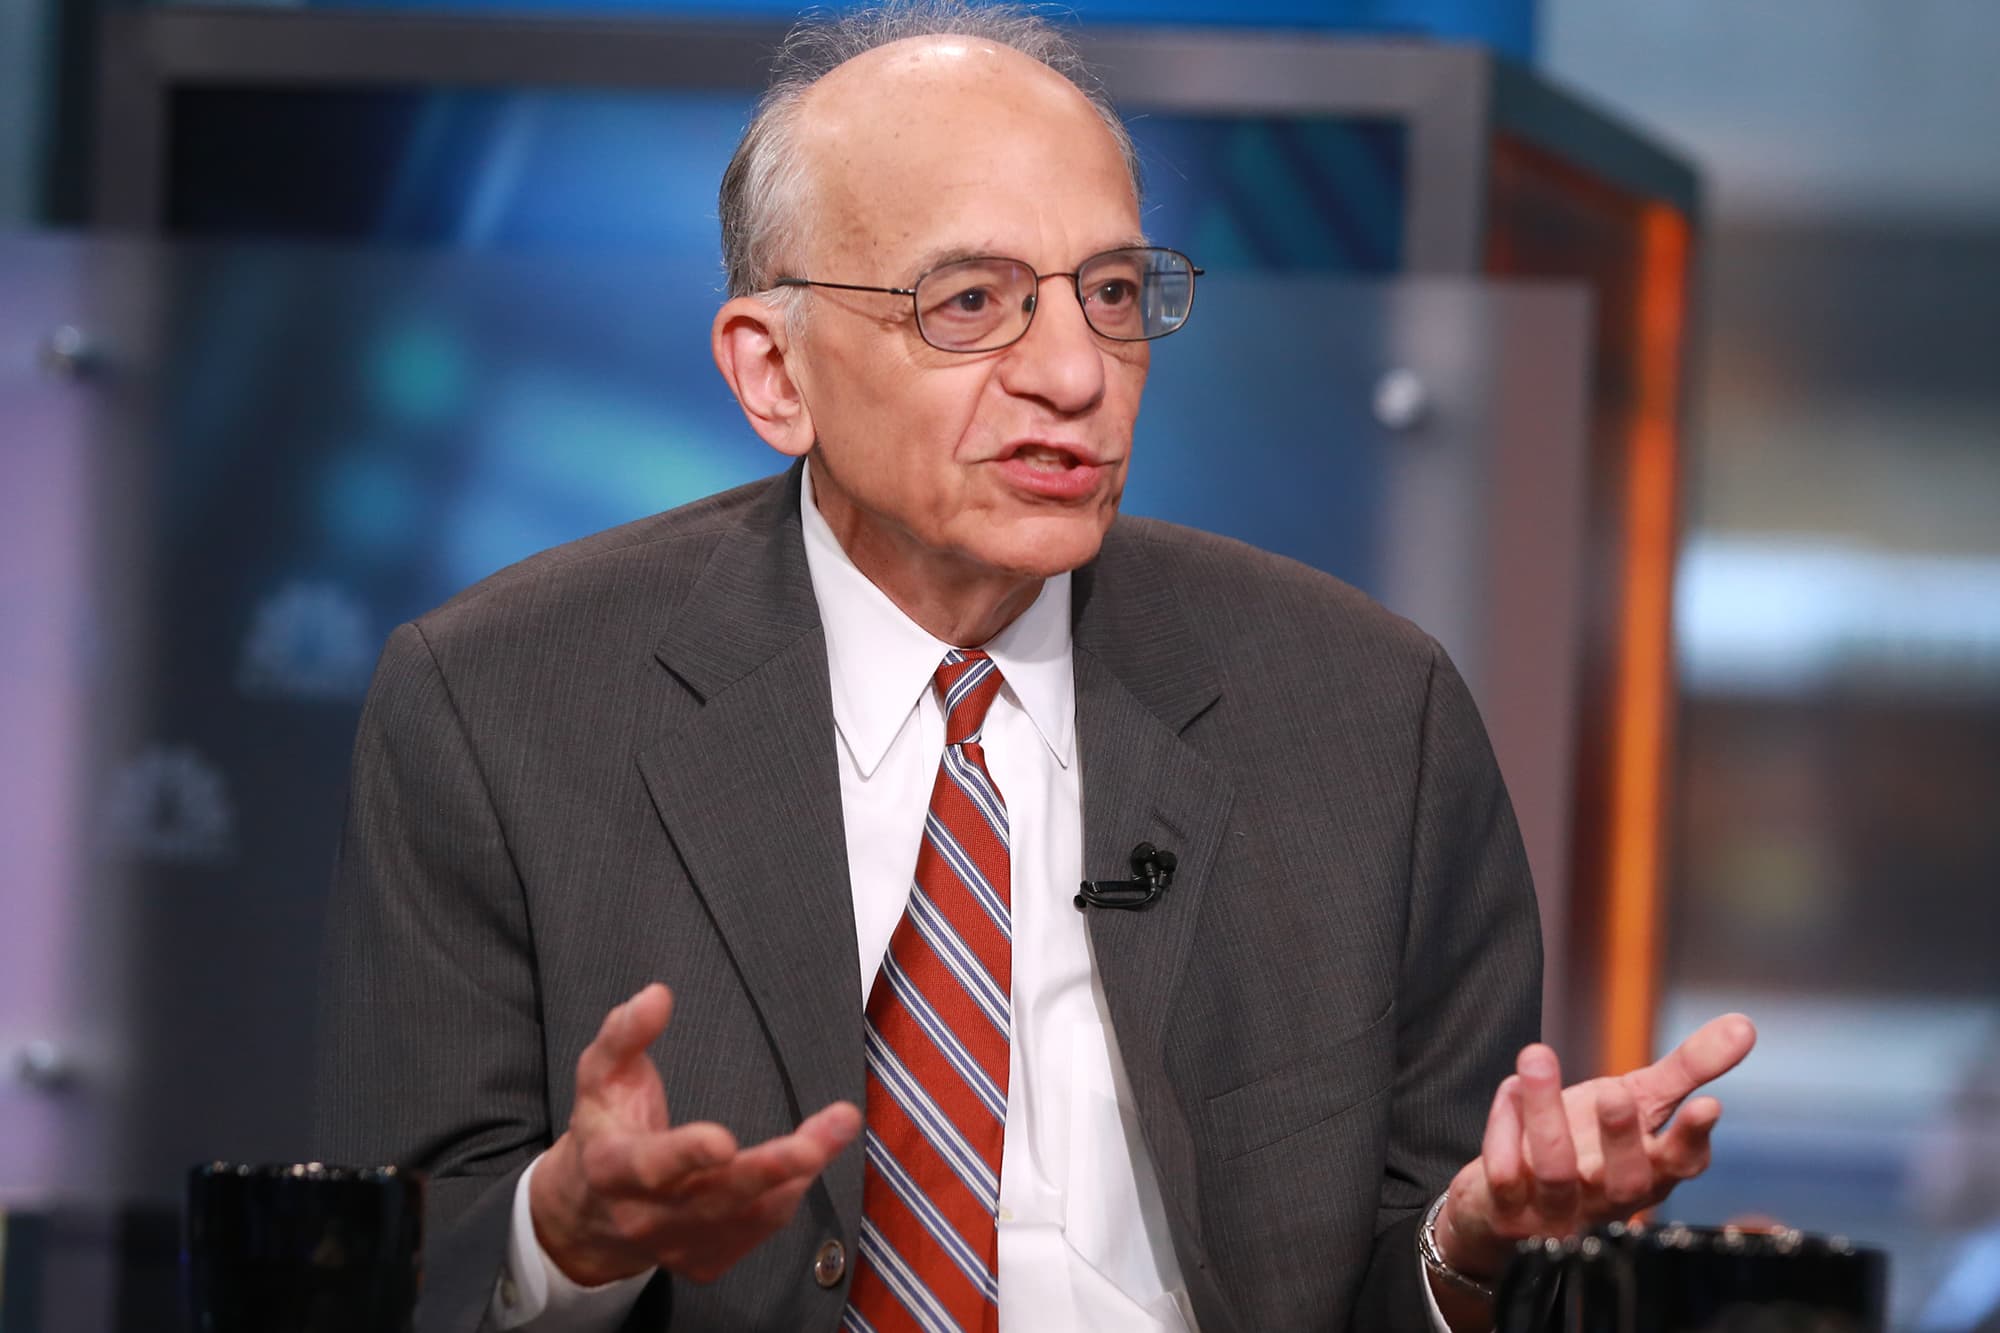 Stocks could rebound as much as 20% in 2023, predicts Wharton's Jeremy Siegel